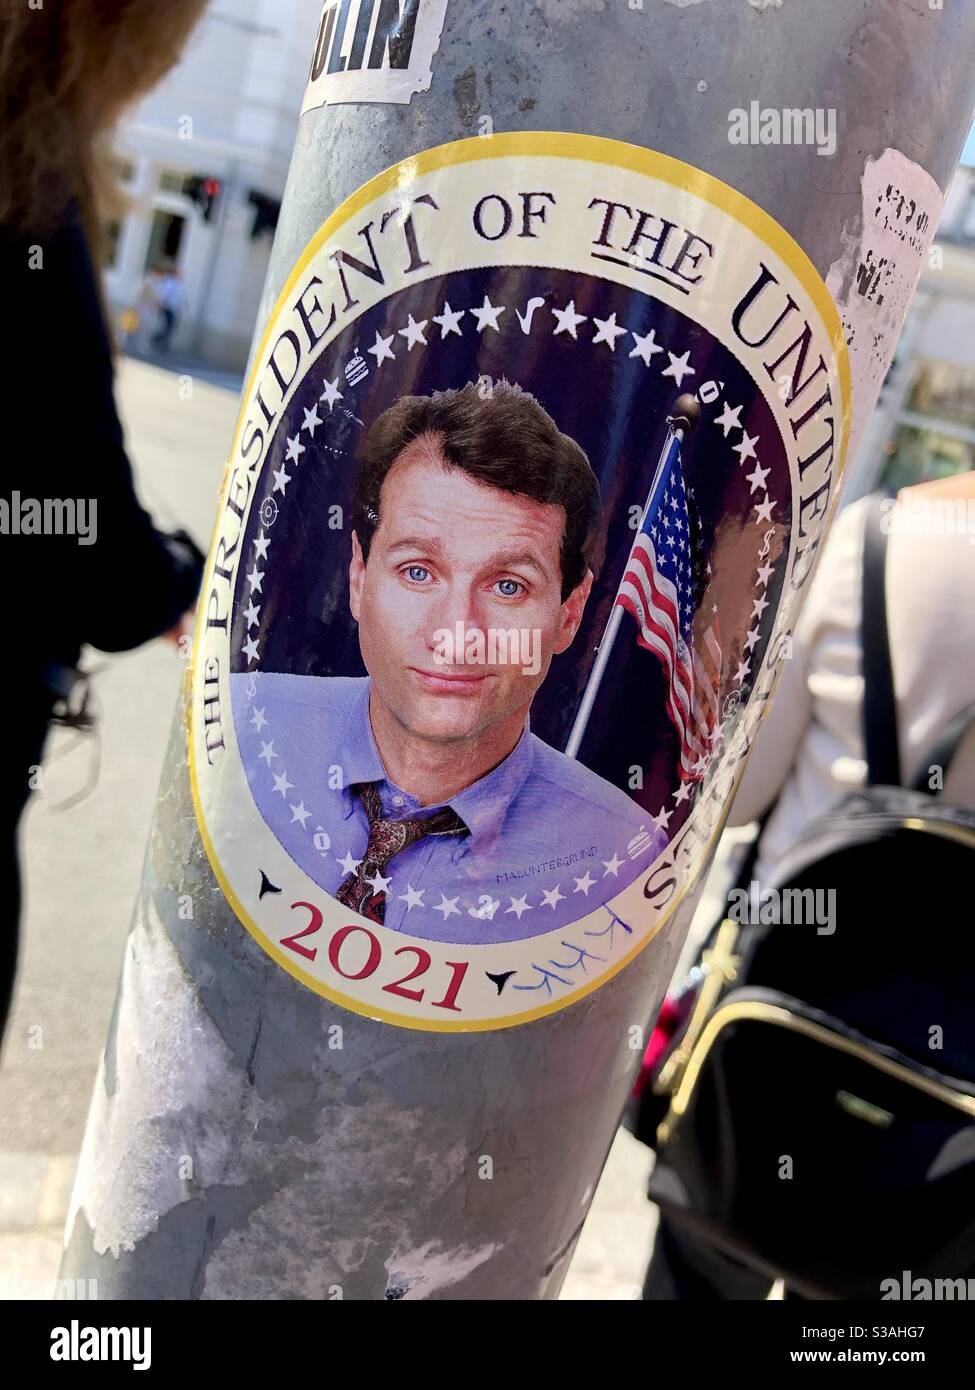 Funny sign of actor Ed O’Neill who played Al Bundy on Married with Children tv show promoting him to be President of the United States in 2021 in Saltzburg, Austria by the Makartsteg bridge. Stock Photo